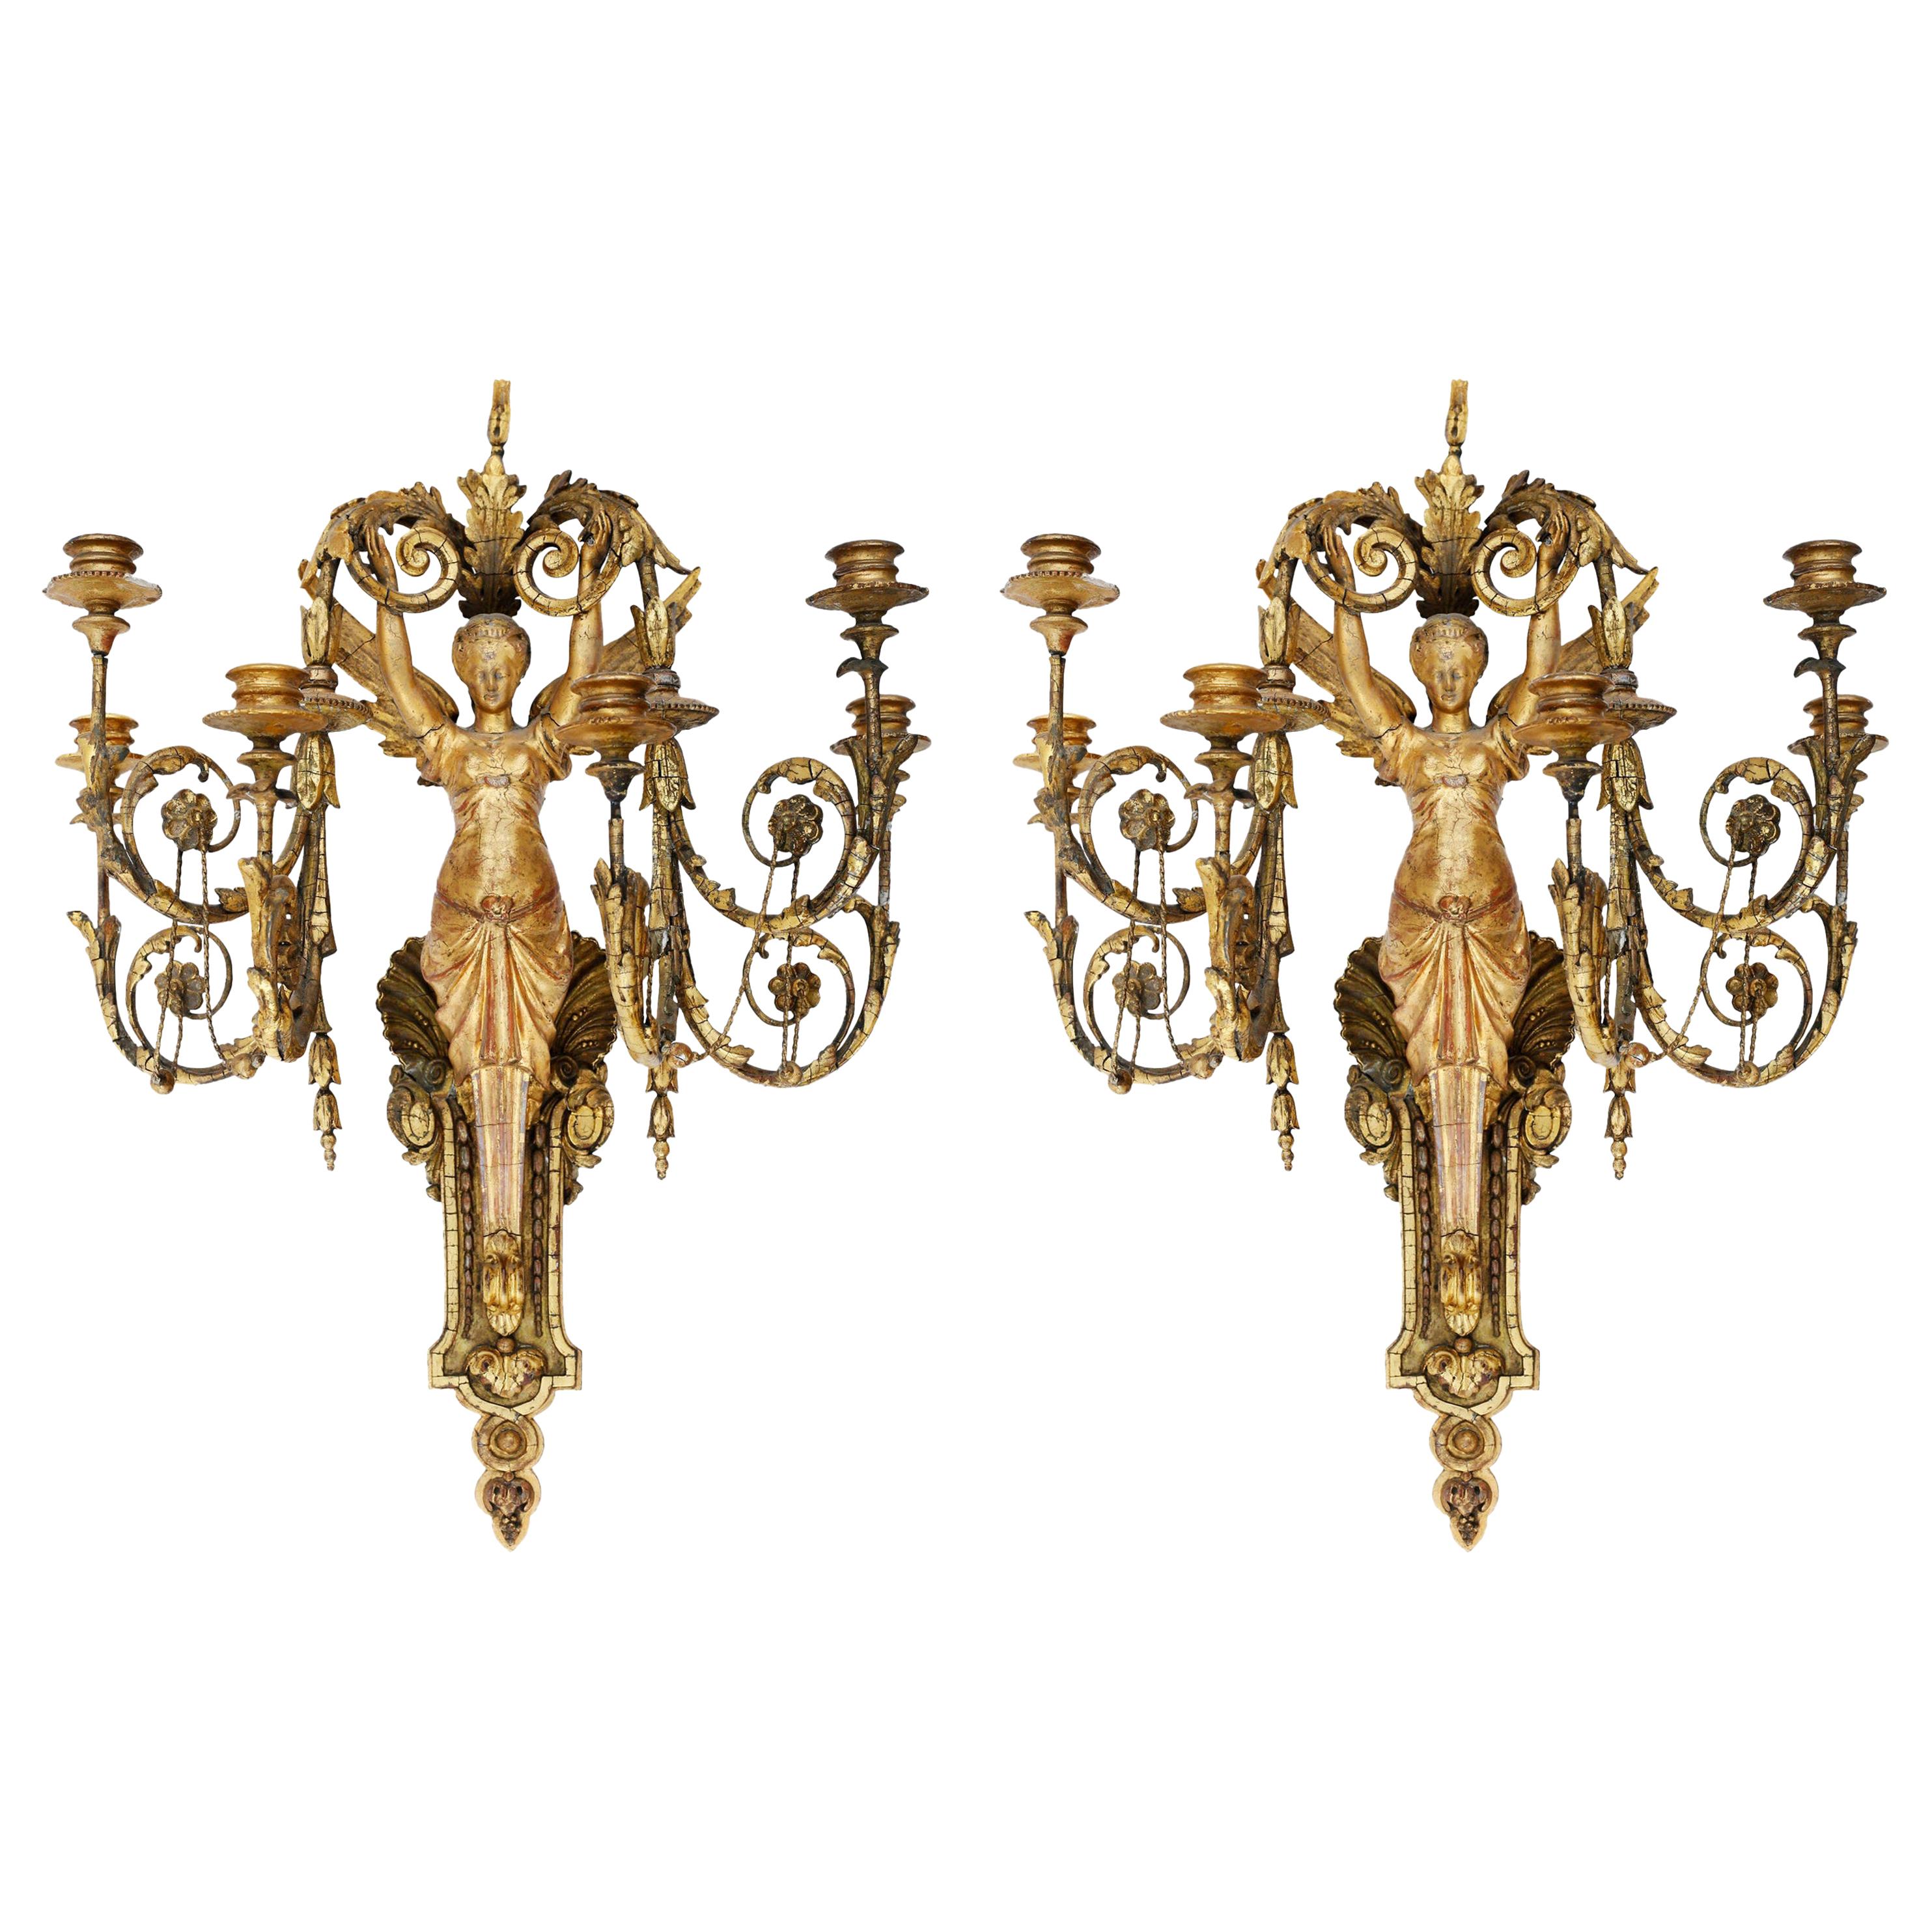 Pair of Early 19th Century Italian Neoclassical Gilt Figural Six-Light Sconces For Sale